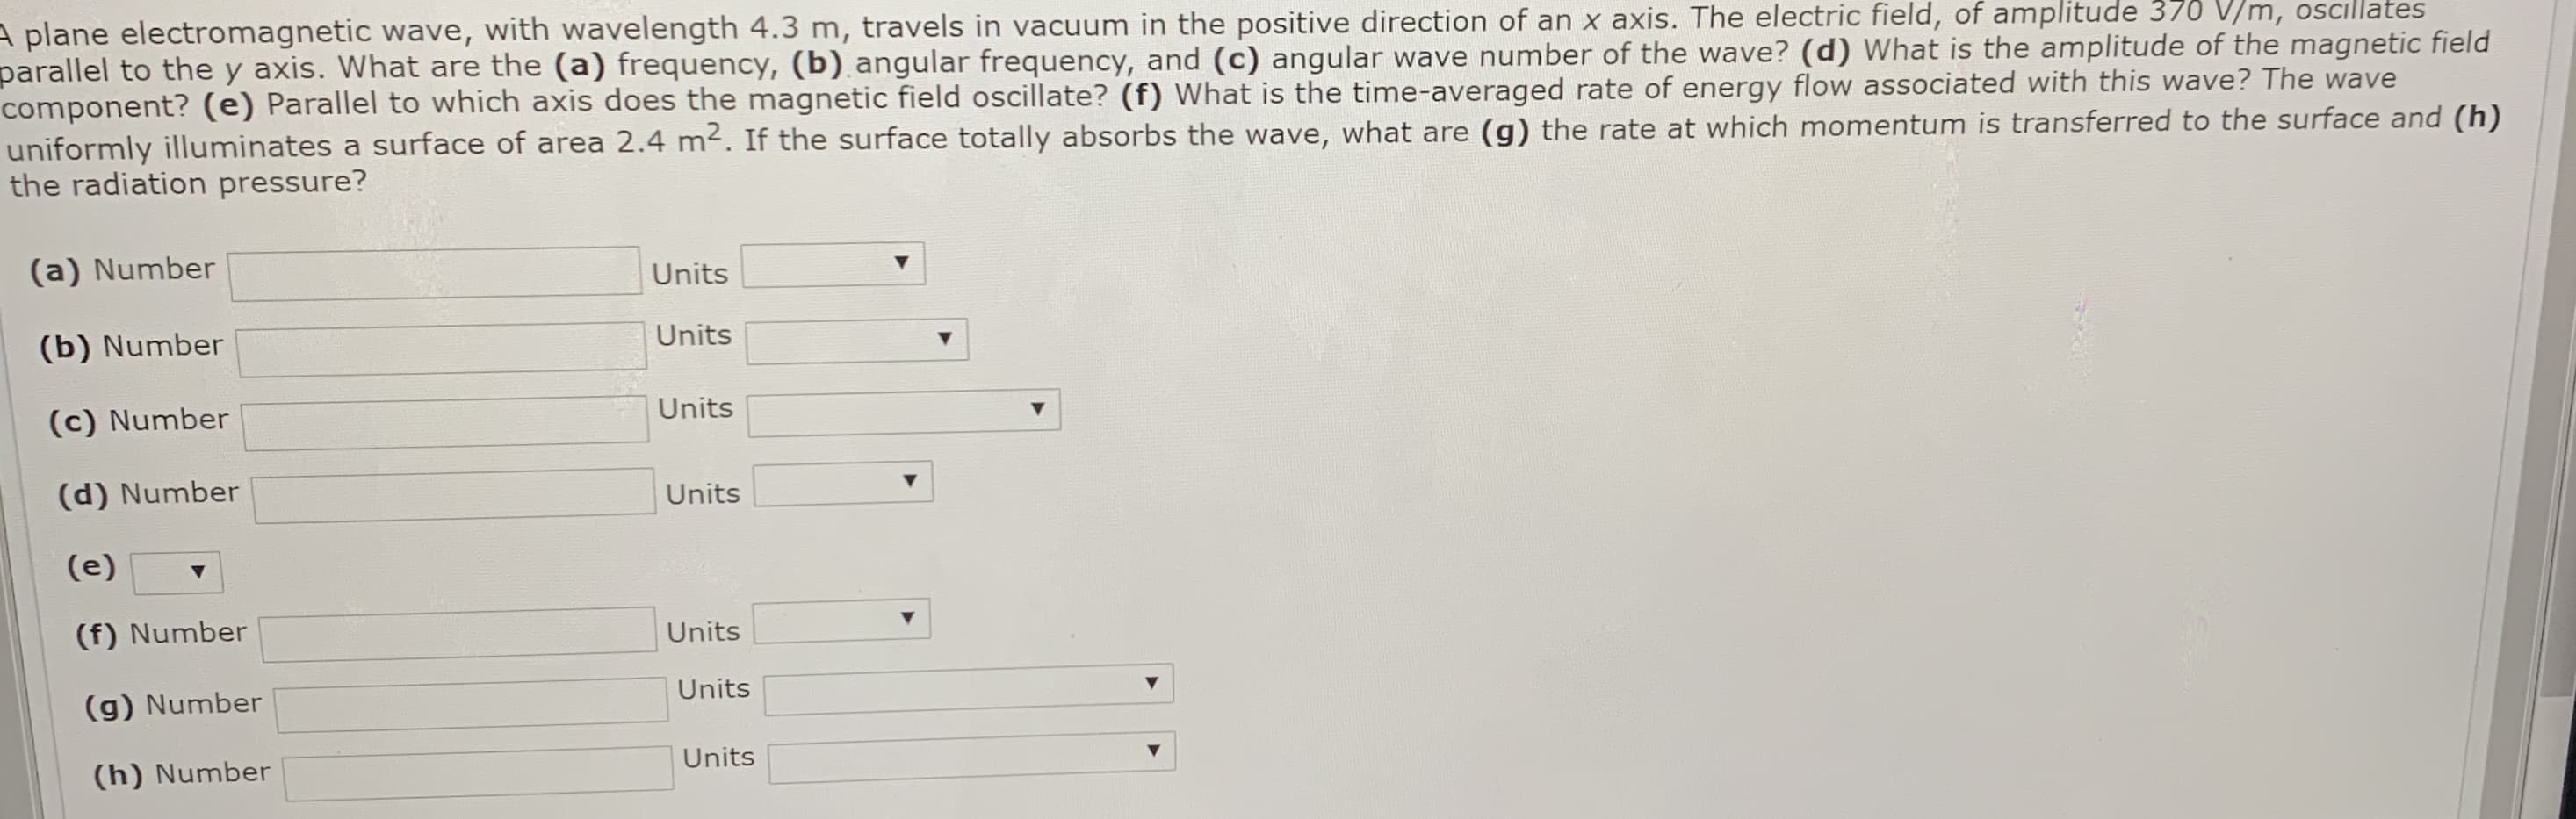 A plane electromagnetic wave, with wavelength 4.3 m, travels in vacuum in the positive direction of an x axis. The electric field, of amplitude 370 V/m, oscillates
parallel to the y axis. What are the (a) frequency, (b) angular frequency, and (c) angular wave number of the wave? (d) What is the amplitude of the magnetic field
component? (e) Parallel to which axis does the magnetic field oscillate? (f) What is the time-averaged rate of energy flow associated with this wave? The wave
uniformly illuminates a surface of area 2.4 m2. If the surface totally absorbs the wave, what are (g) the rate at which momentum is transferred to the surface and (h)
the radiation pressure?
(a) Number
Units
Units
(b) Number
Units
(c) Number
(d) Number
Units
(e)
(f) Number
Units
Units
(g) Number
Units
(h) Number
